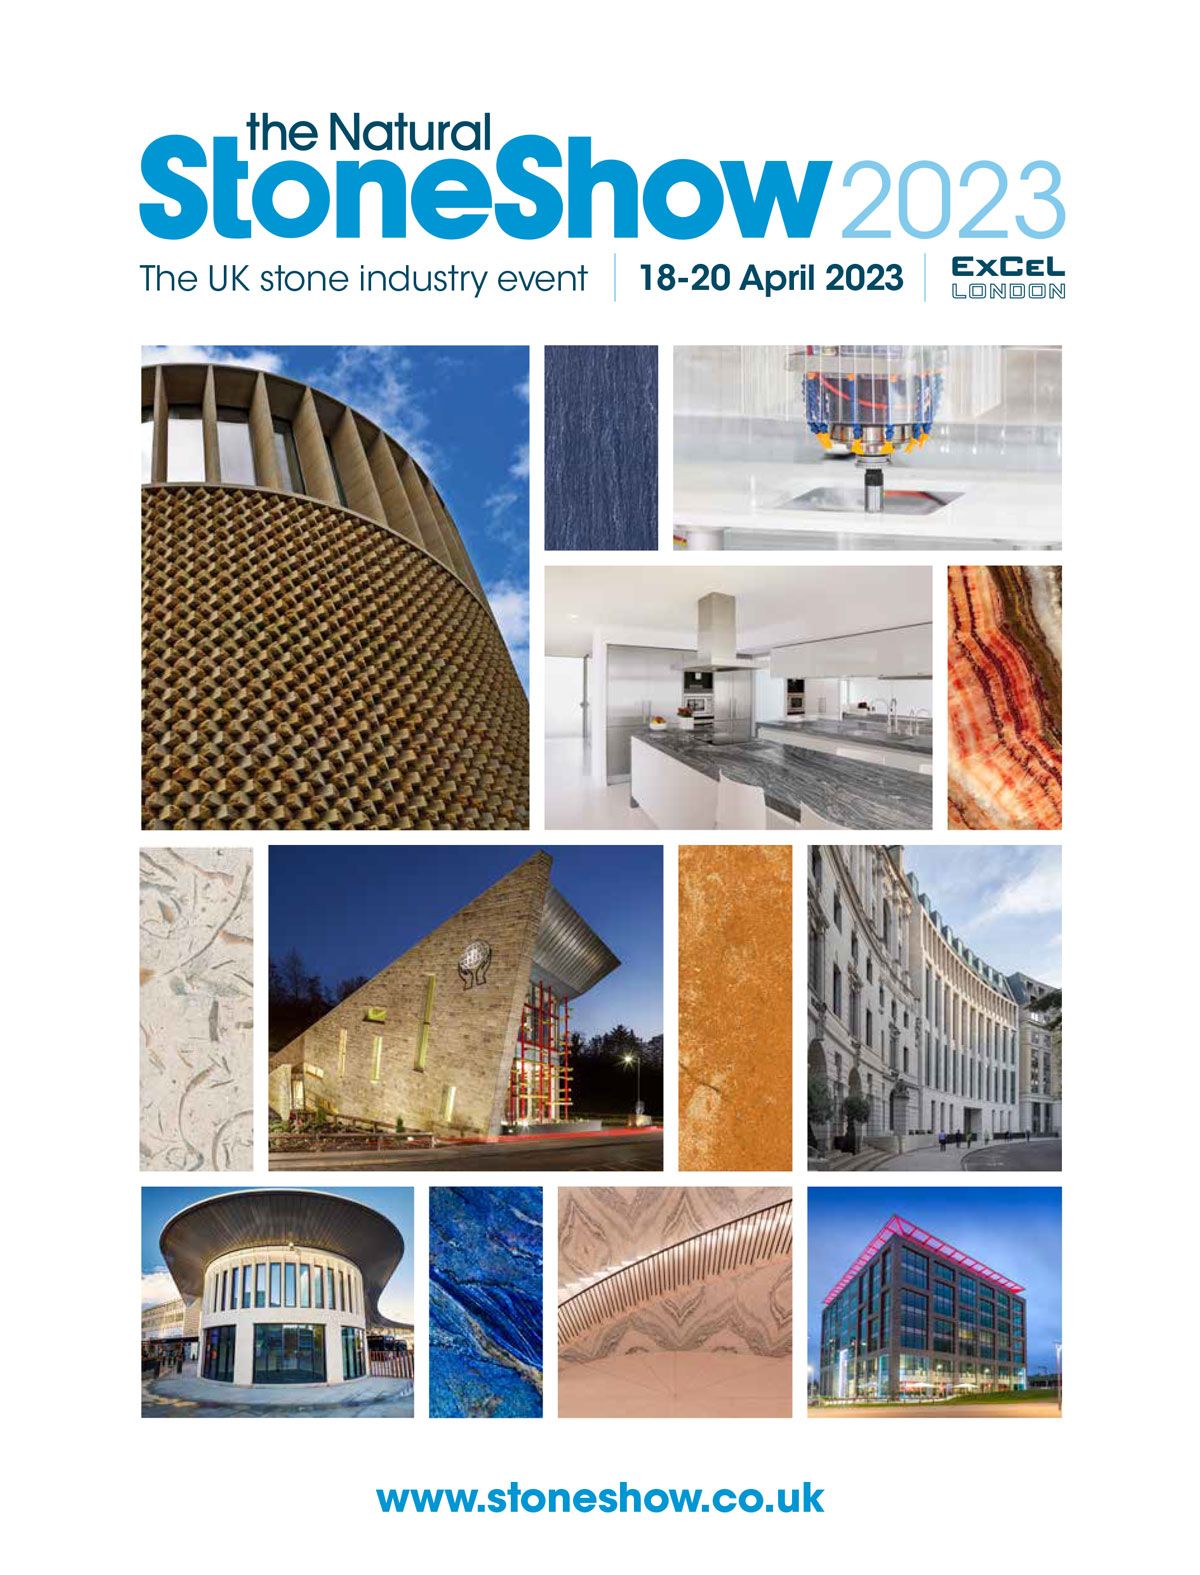 Natural Stone Show exhibitor brochure